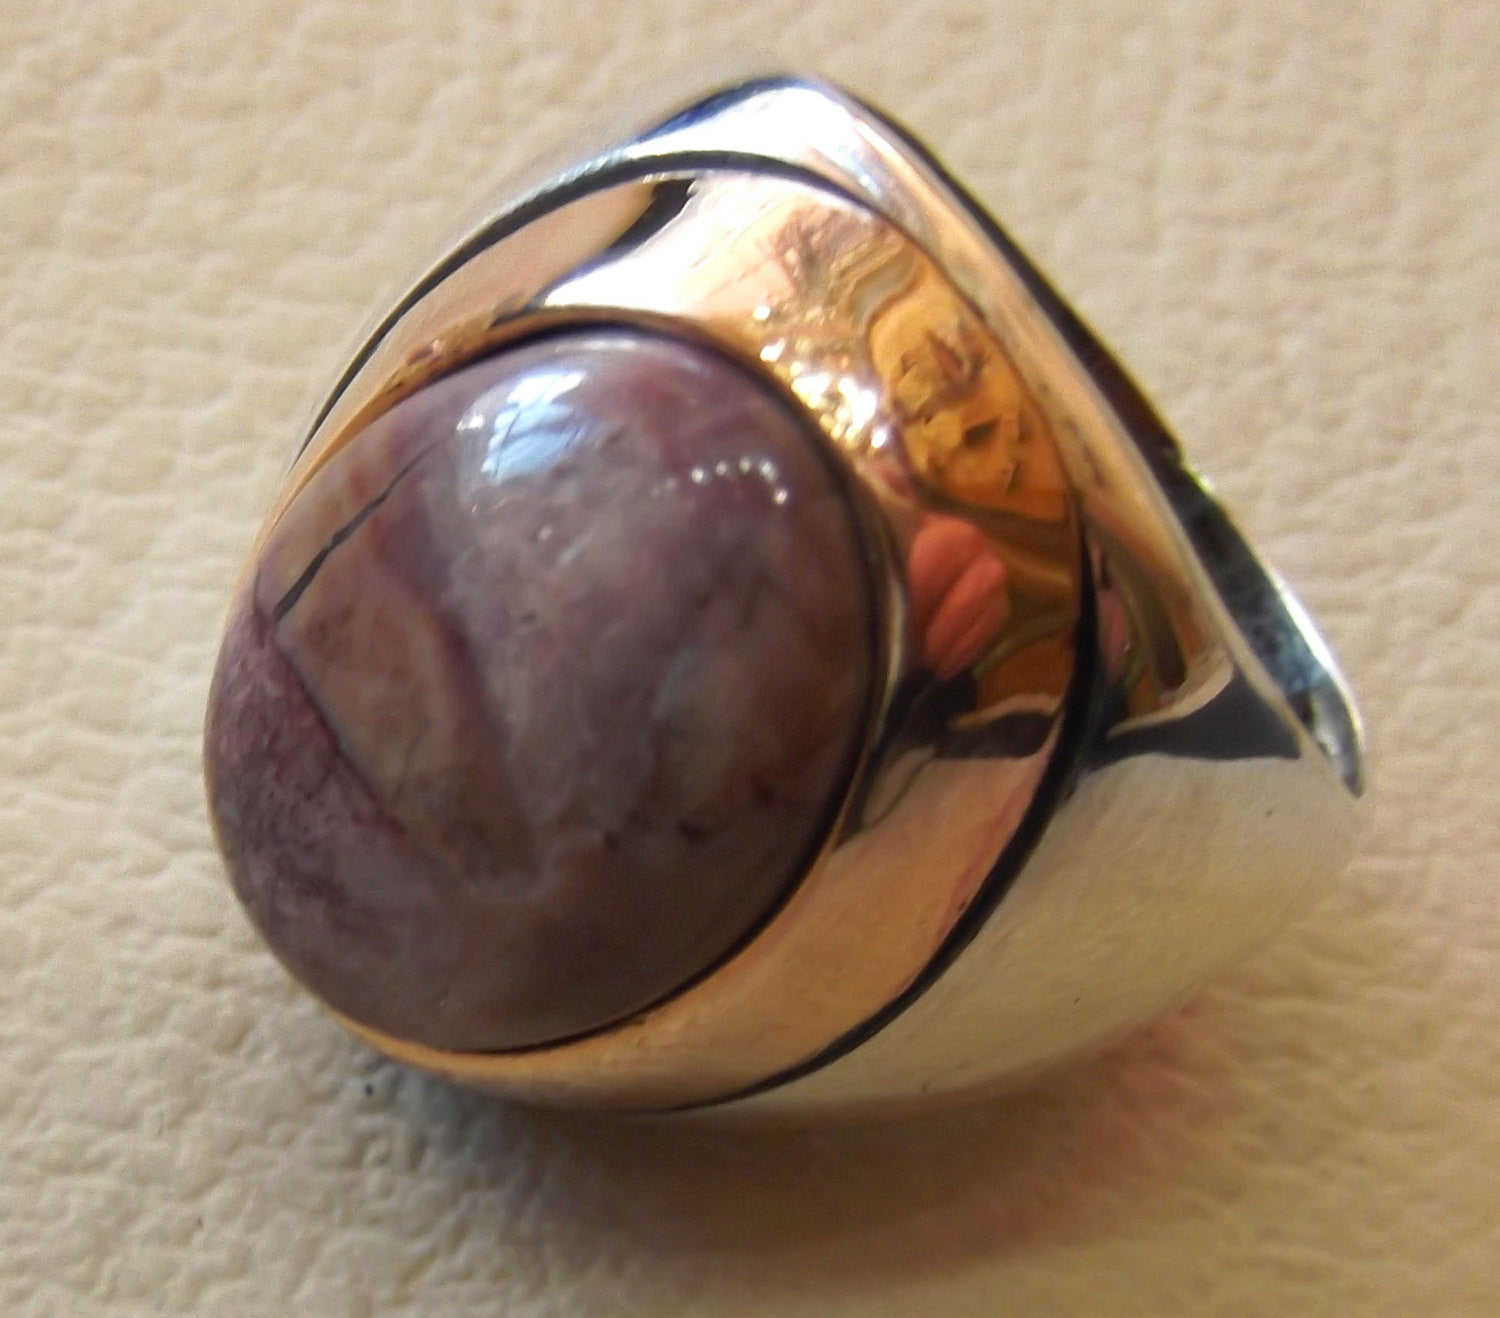 Butterfly jasper natural stone sterling silver 925 huge man ring all sizes jewelry ottoman cocktail high quality style gem in bronze frame